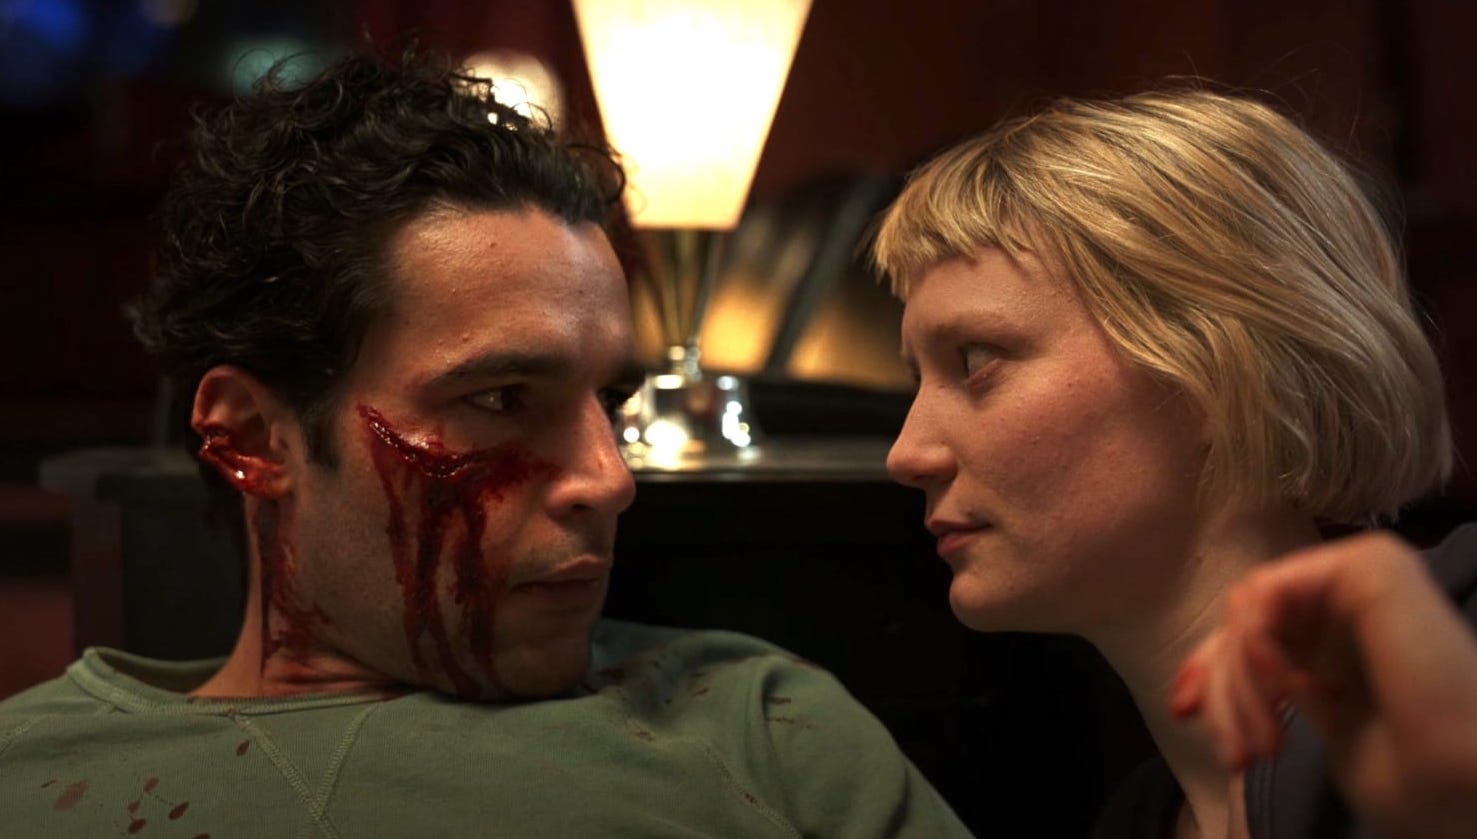 A man in a green shirt bleeds out his eye while sitting on the couch looking at a young blonde woman in Piercing